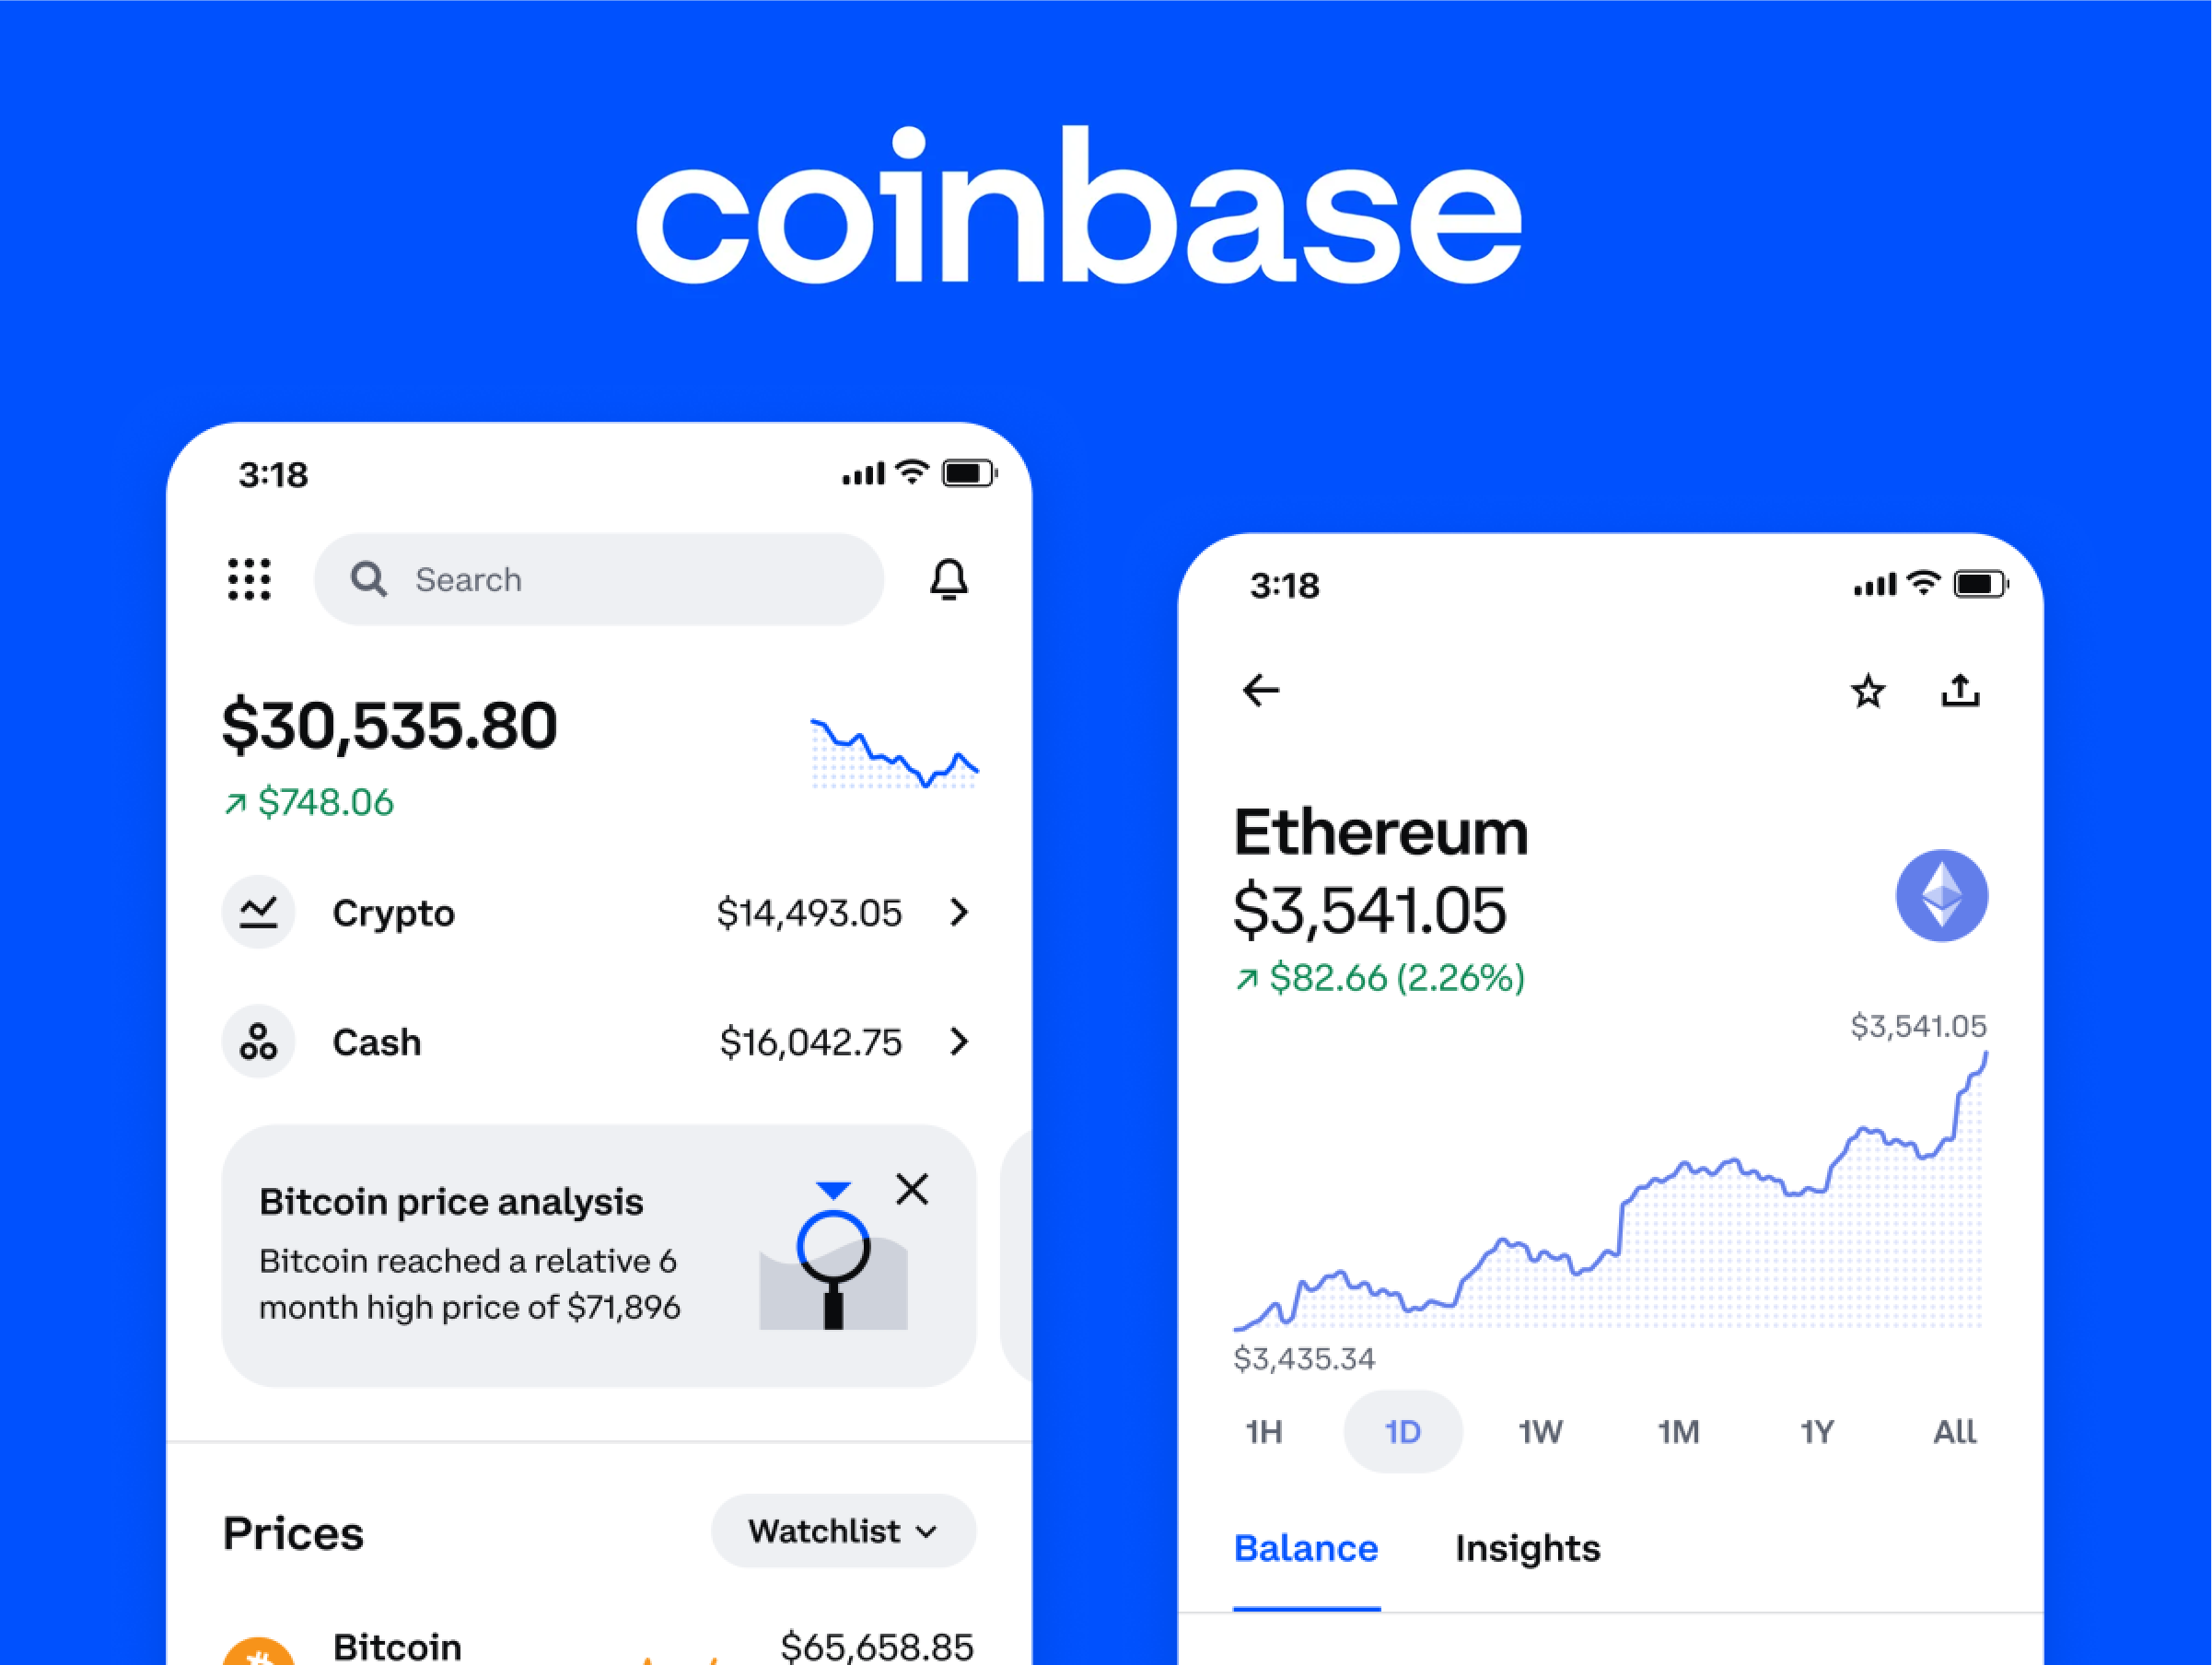 Coinbase advertisement featuring two smartphone screens. The left screen shows a portfolio balance of $30,535.80 with assets in crypto and cash, and a Bitcoin price analysis. The right screen displays an Ethereum balance of $3,541.05 with a price chart showing its recent performance. The Coinbase logo is prominently displayed at the top of the image on a blue background.